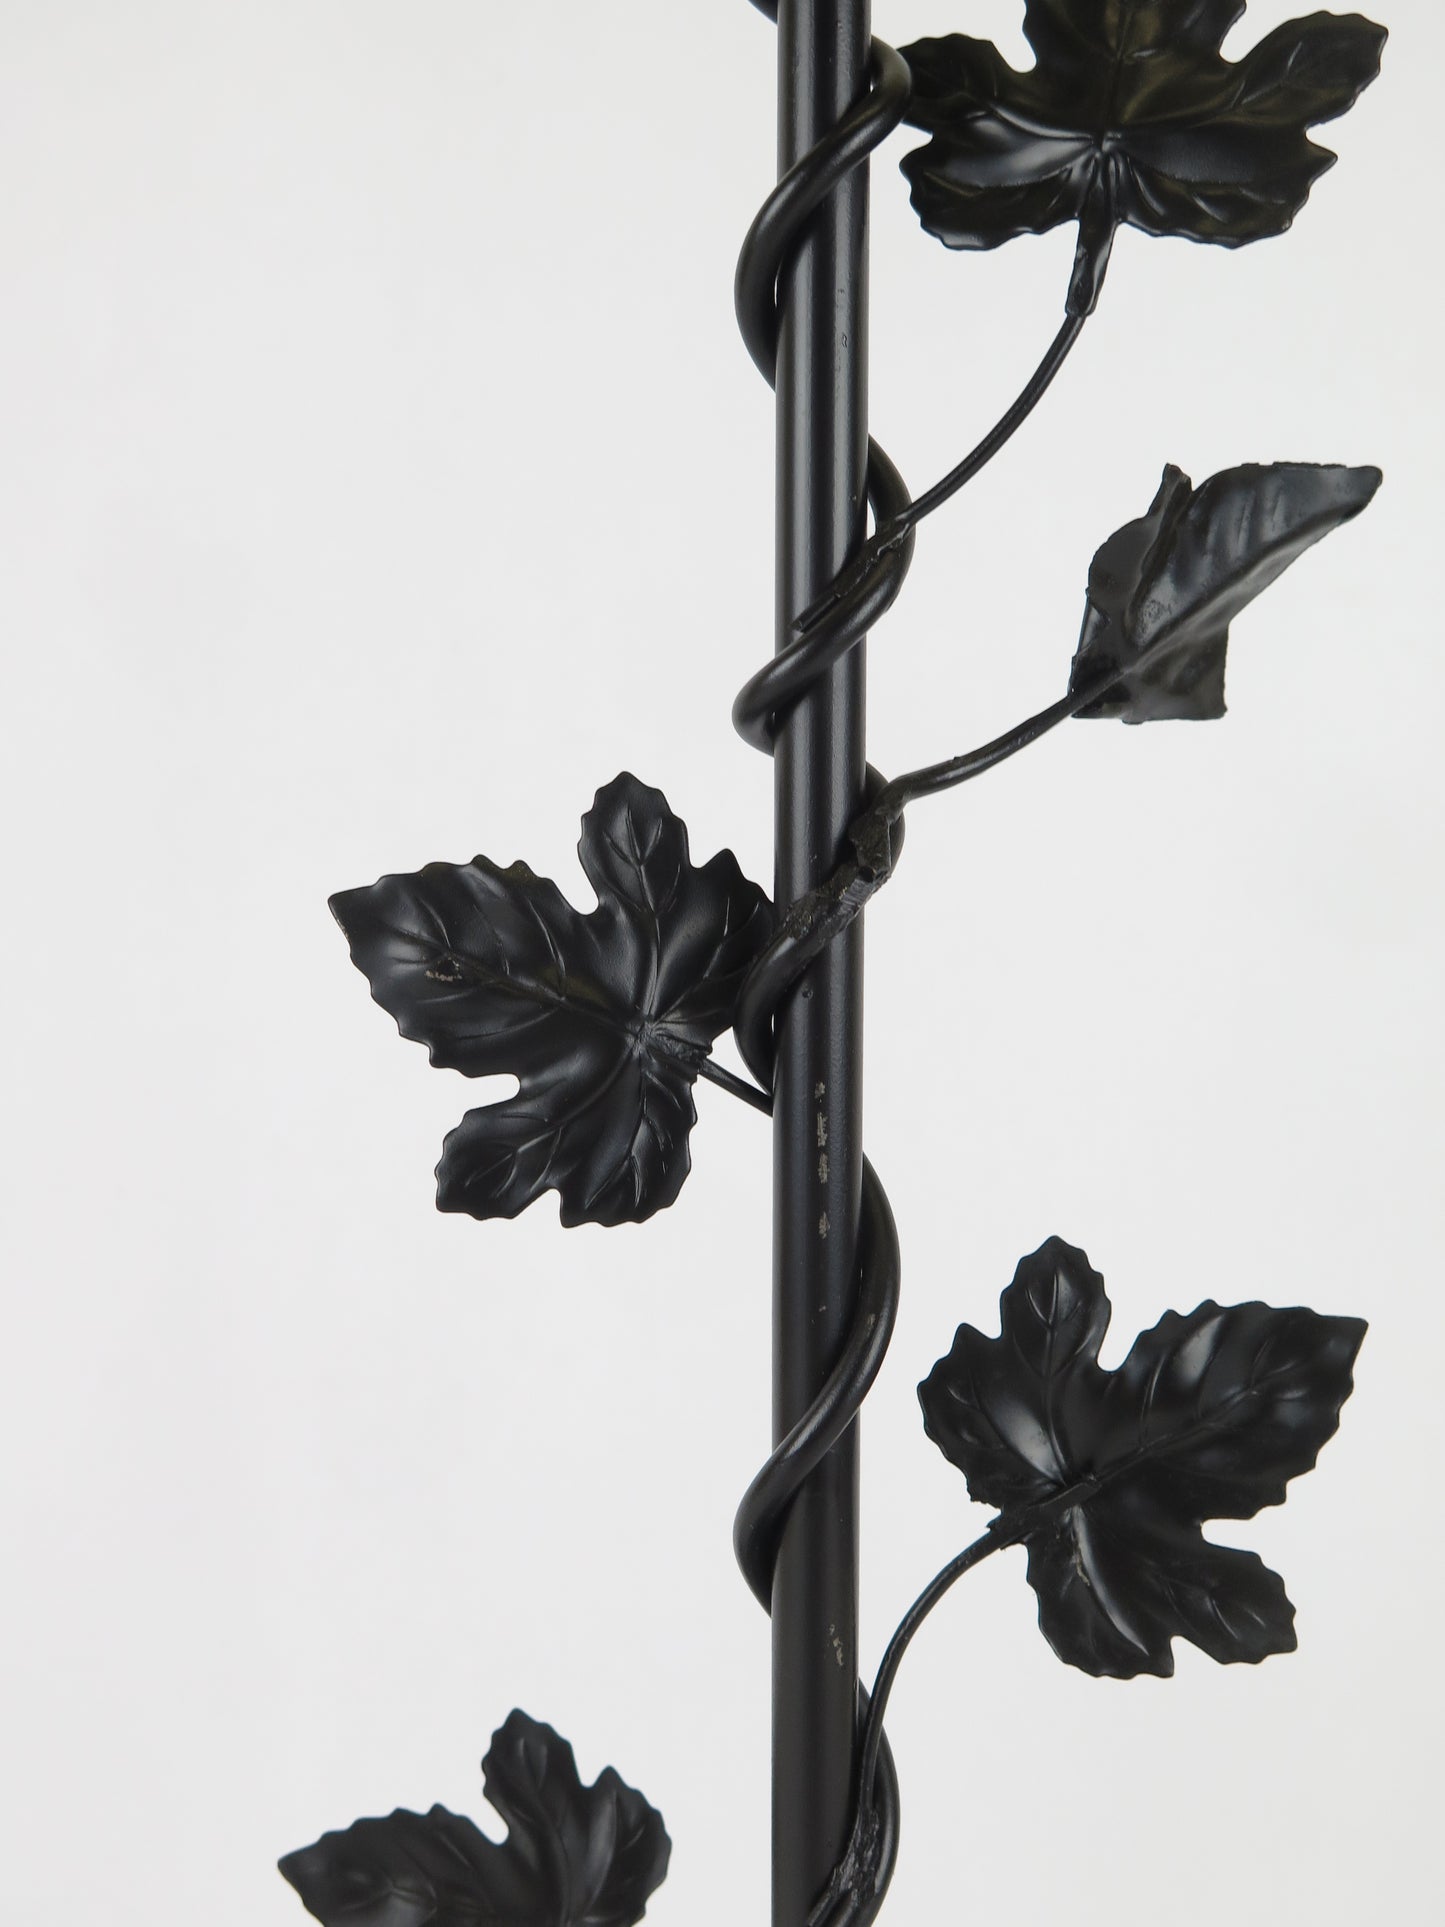 VINTAGE DESK LAMP WROUGHT IRON EMBOSSED METAL LEAVES DECORATION CH37